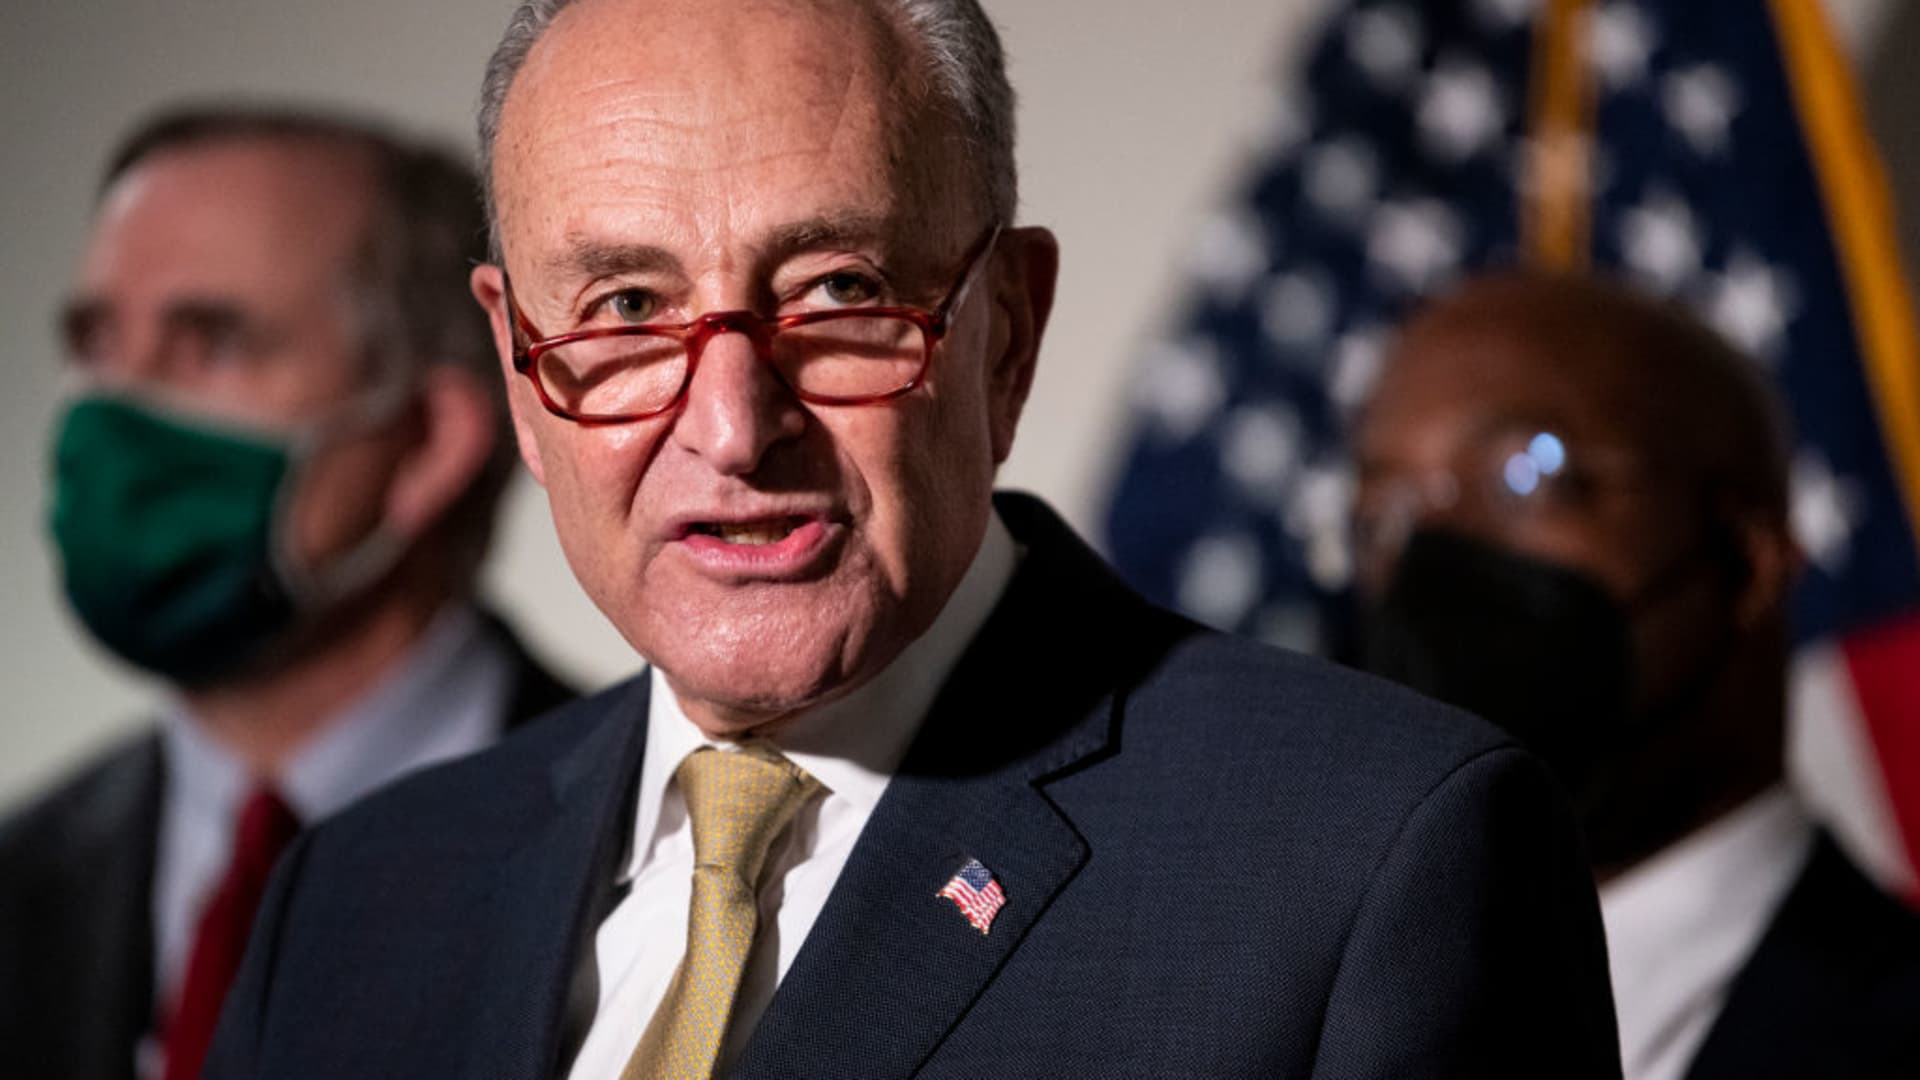 Senate Majority Leader Chuck Schumer, D-N.Y., holds his new conference following the Senate Democrats caucus meeting on voting rights and the filibuster on Tuesday, January 18, 2022.